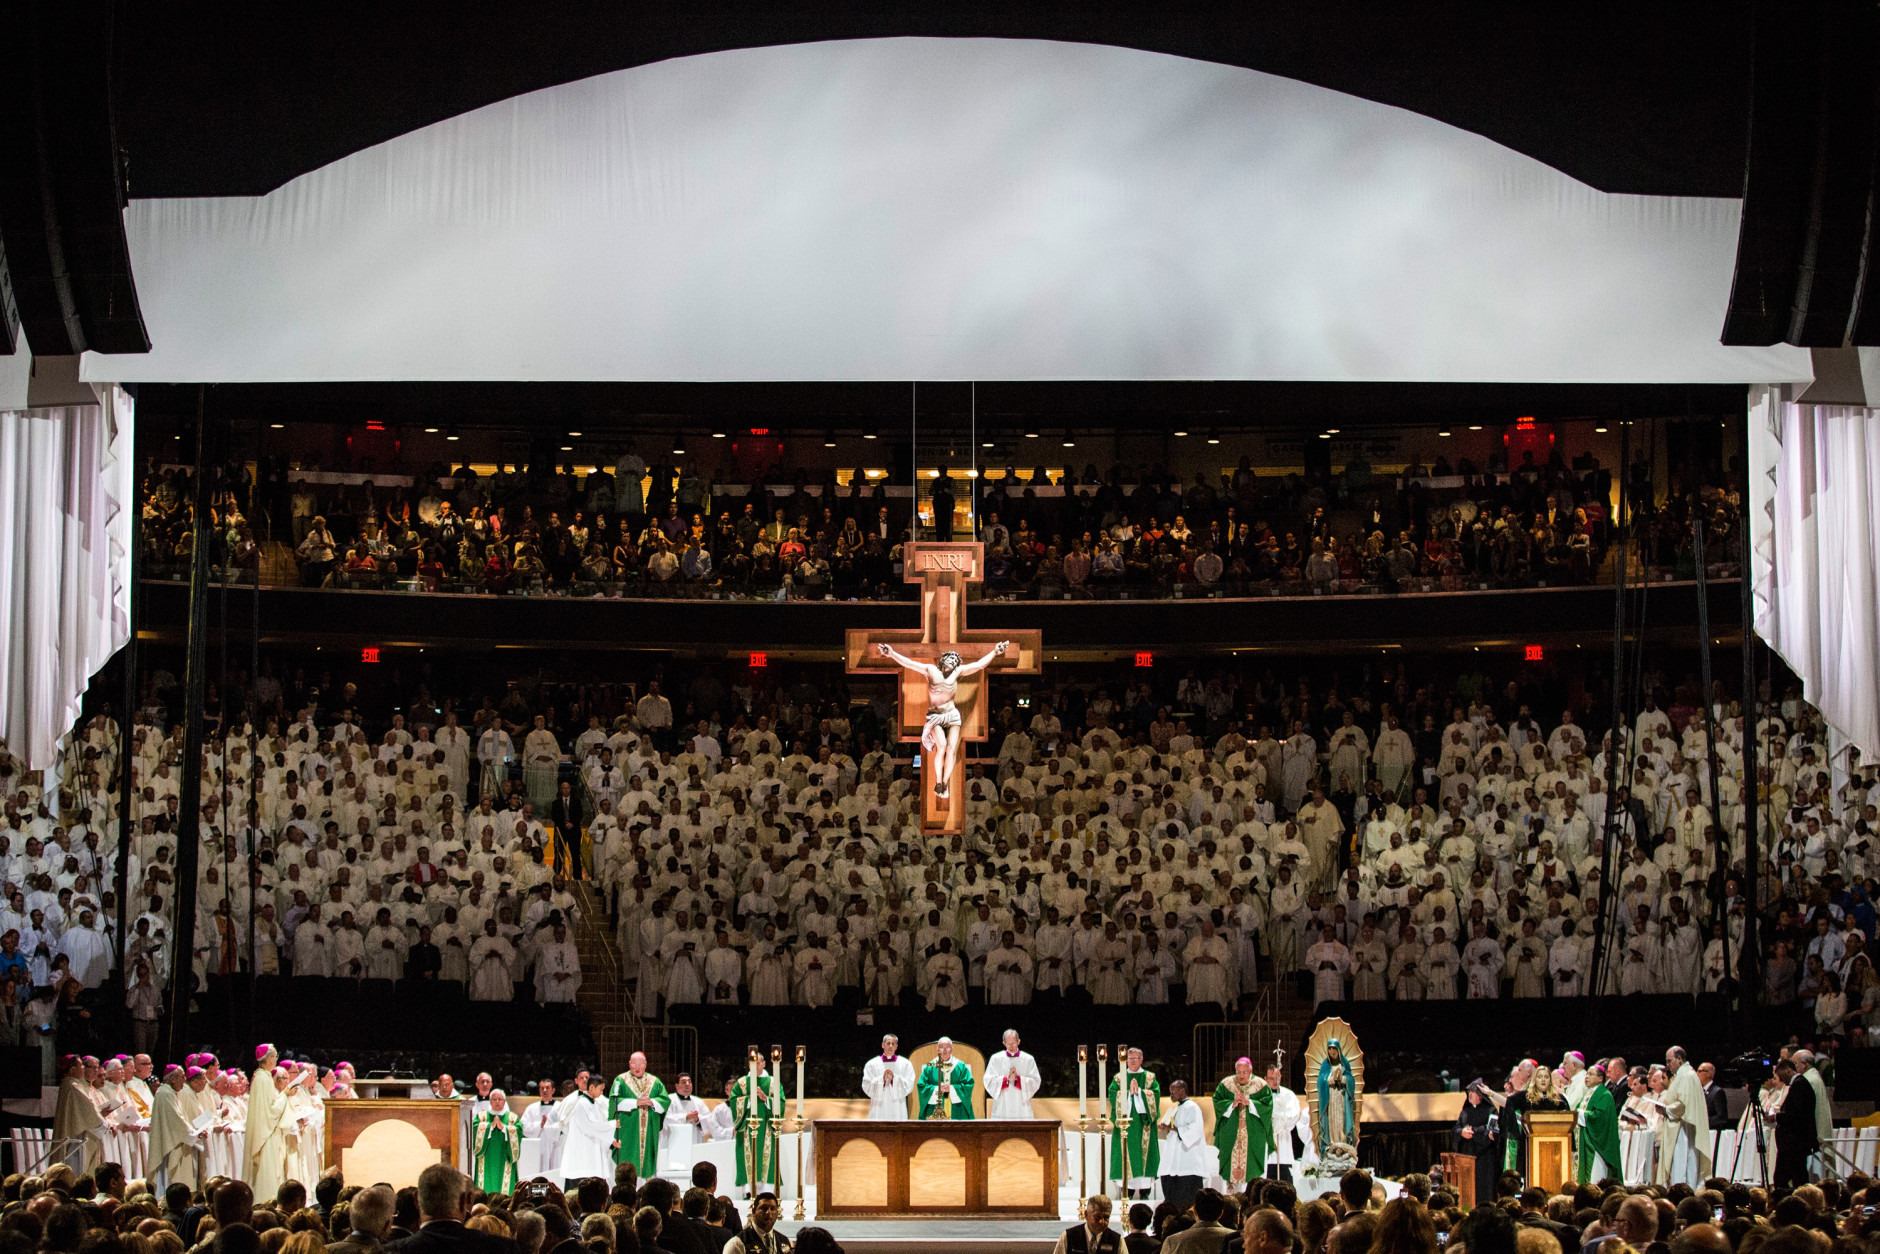 NEW YORK, NY - SEPTEMBER 25:  Pope Francis celebrates Mass at Madison Square Garden on September 25, 2015 in New York City. The pope is visiting New York City during a six-day tour of the United States, that included a stop in Washington D.C. and includes one in Philadelphia.  (Photo by Andrew Burton/Getty Images)